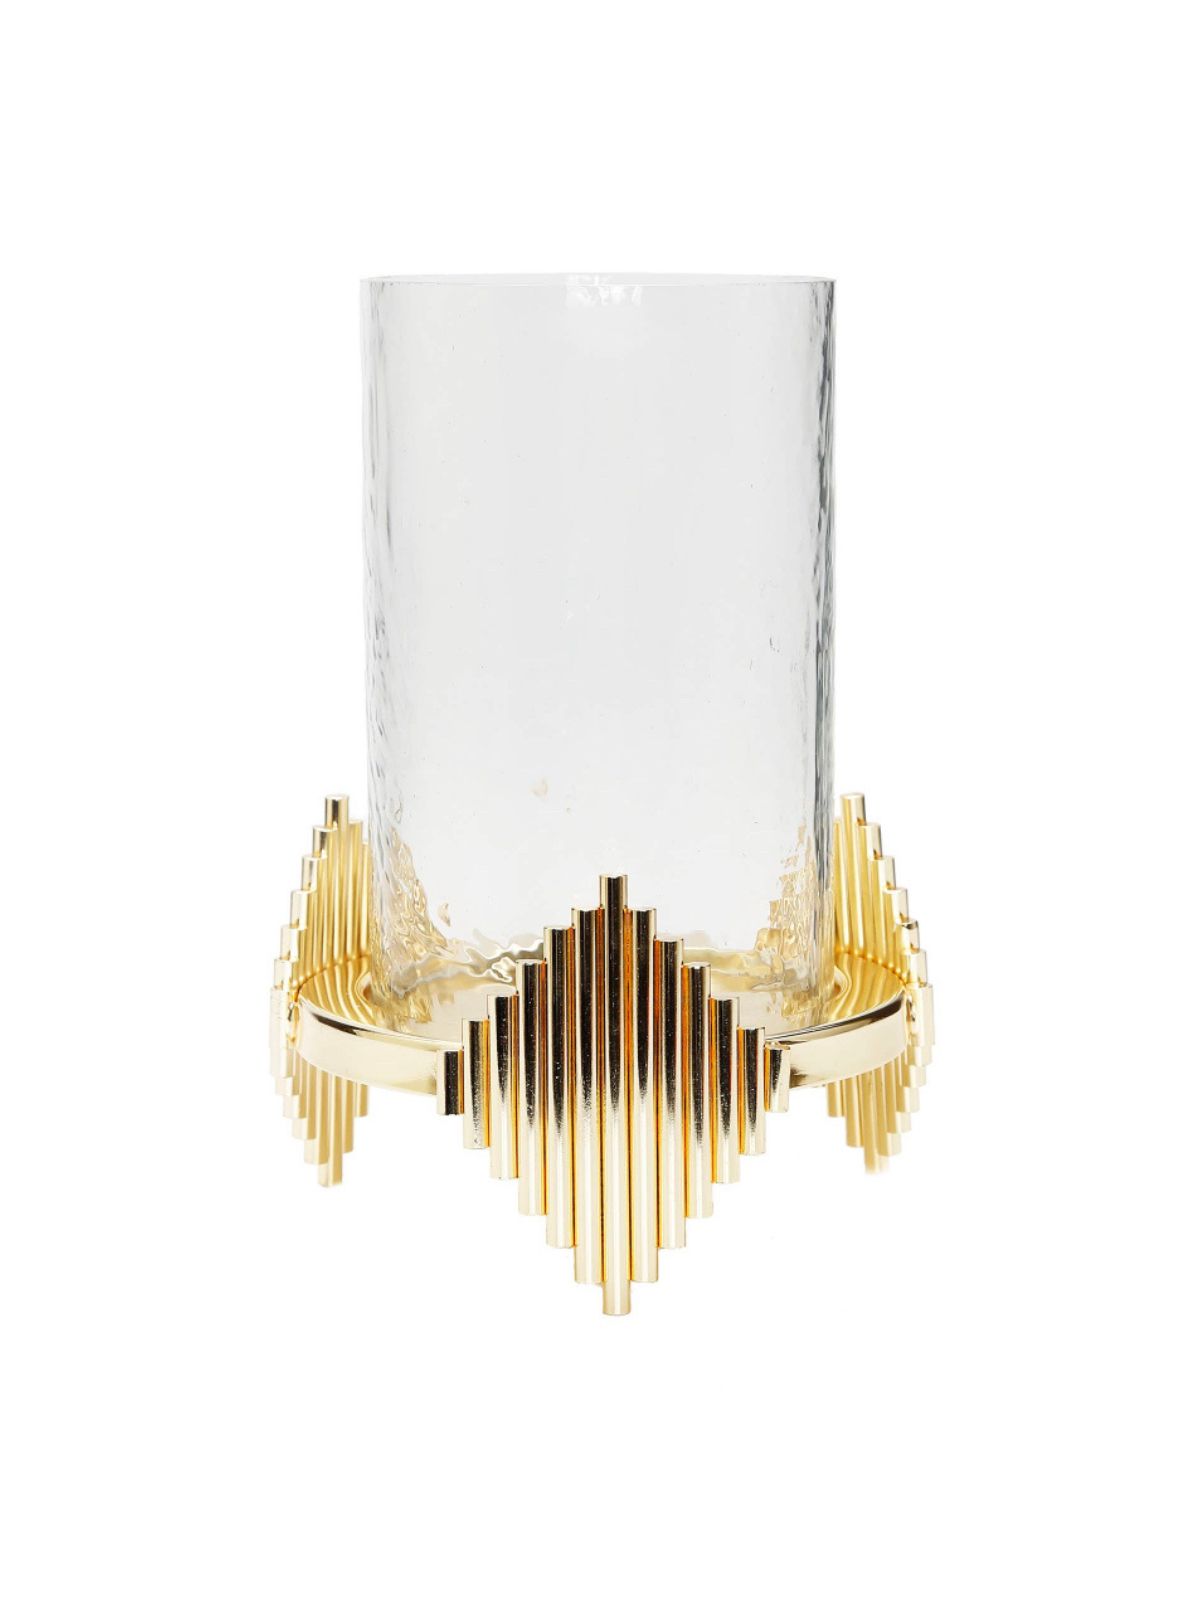 This stunning Glass Dome Candle Holder has an amazing Gold Diamond Design, Available in 2 Sizes.